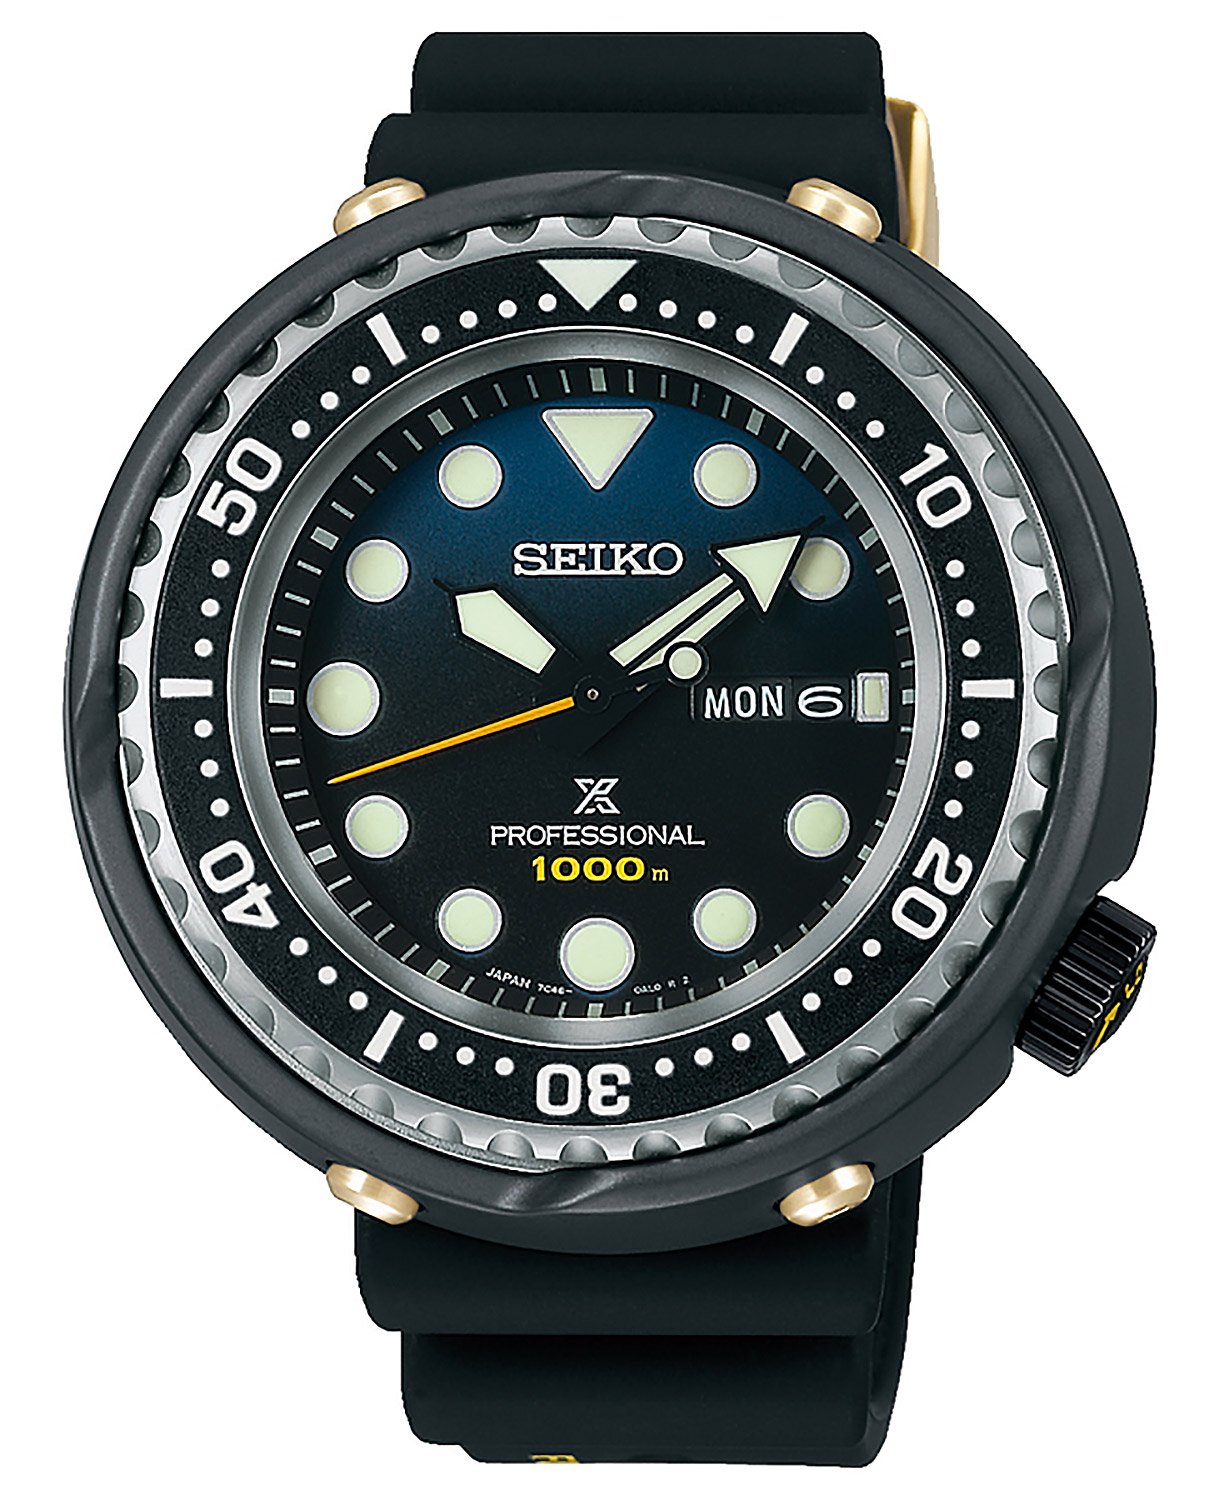 Seiko S23635J1 Prospex Professional Diver's Watch for Men Limited Edition